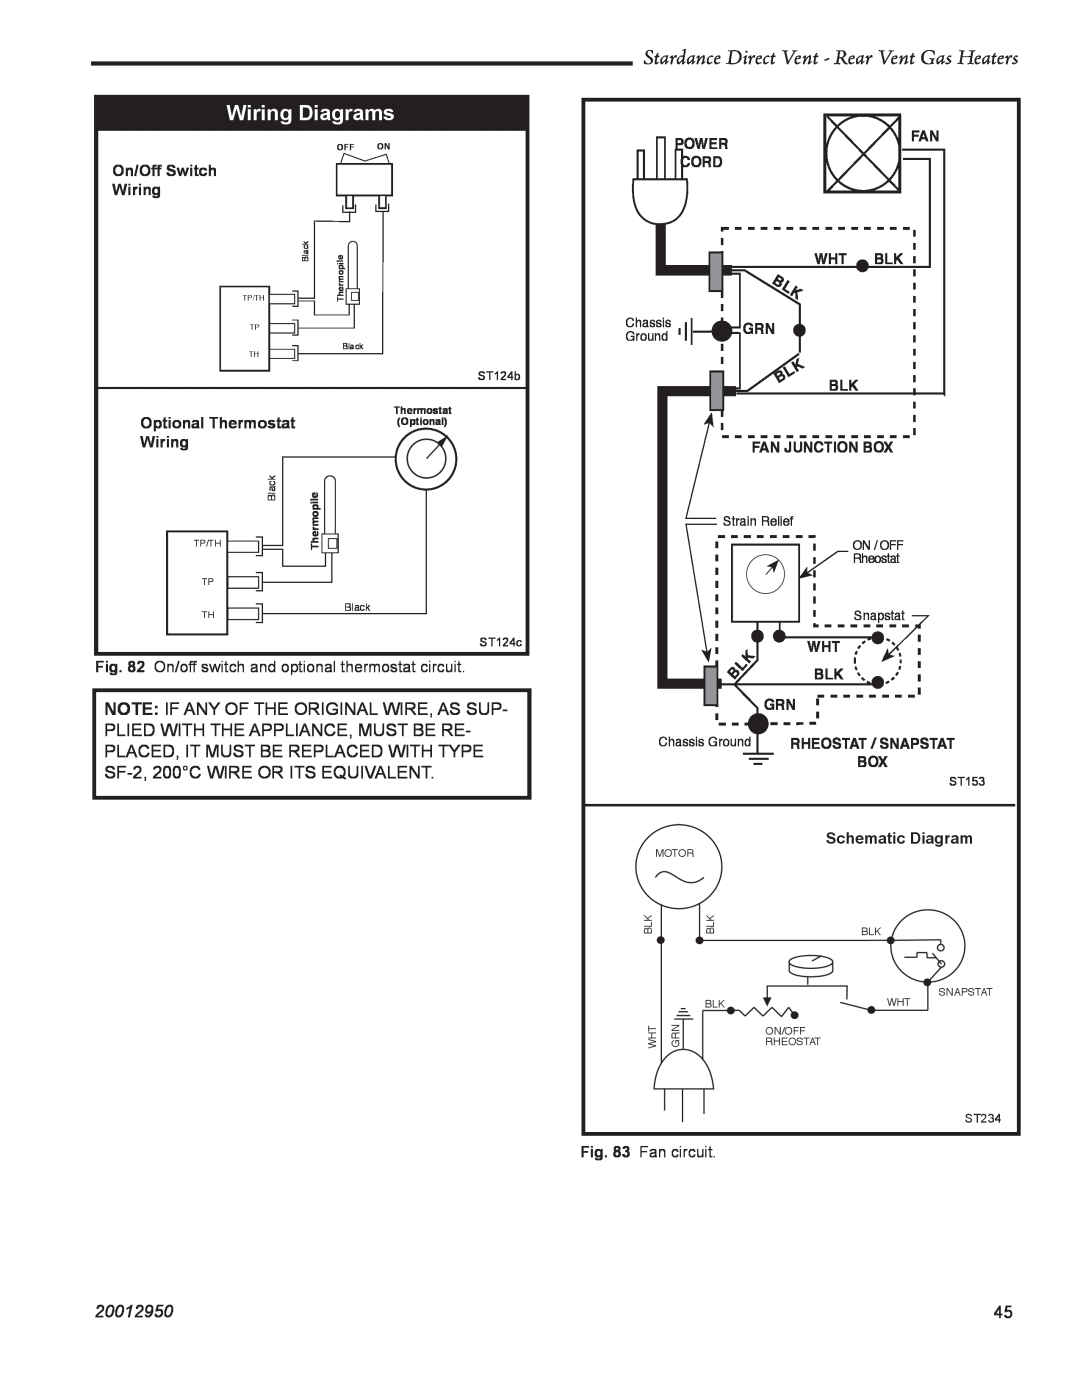 Vermont Casting SDDVRCVG Wiring Diagrams, Stardance Direct Vent - Rear Vent Gas Heaters, 20012950, Fan circuit, Power 